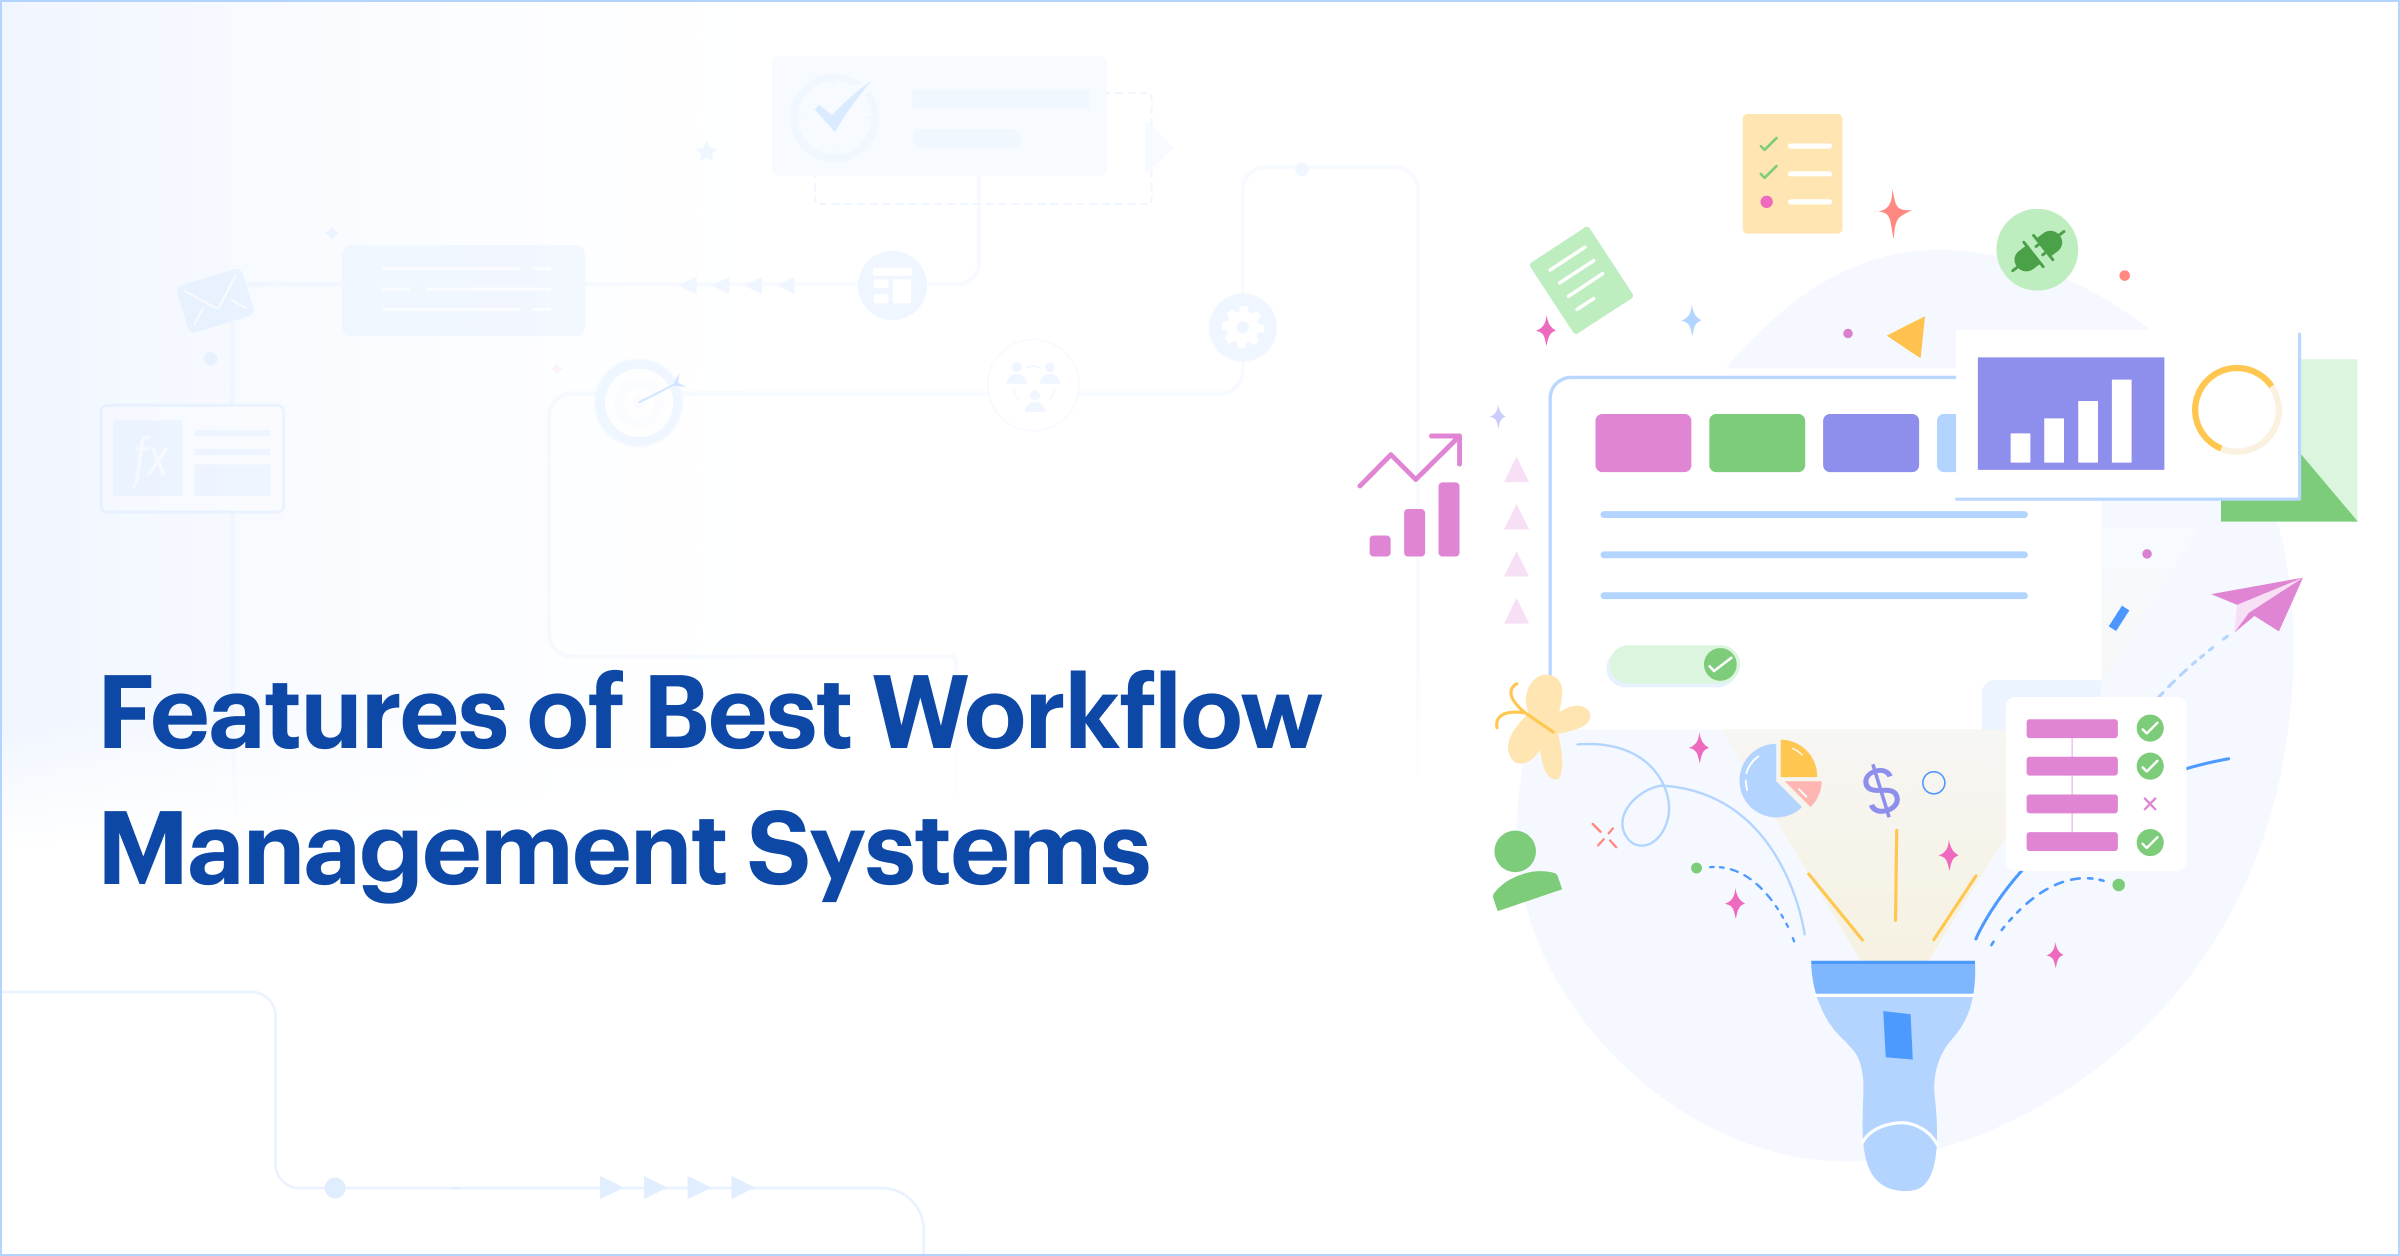 Features of Best Workflow Management Systems